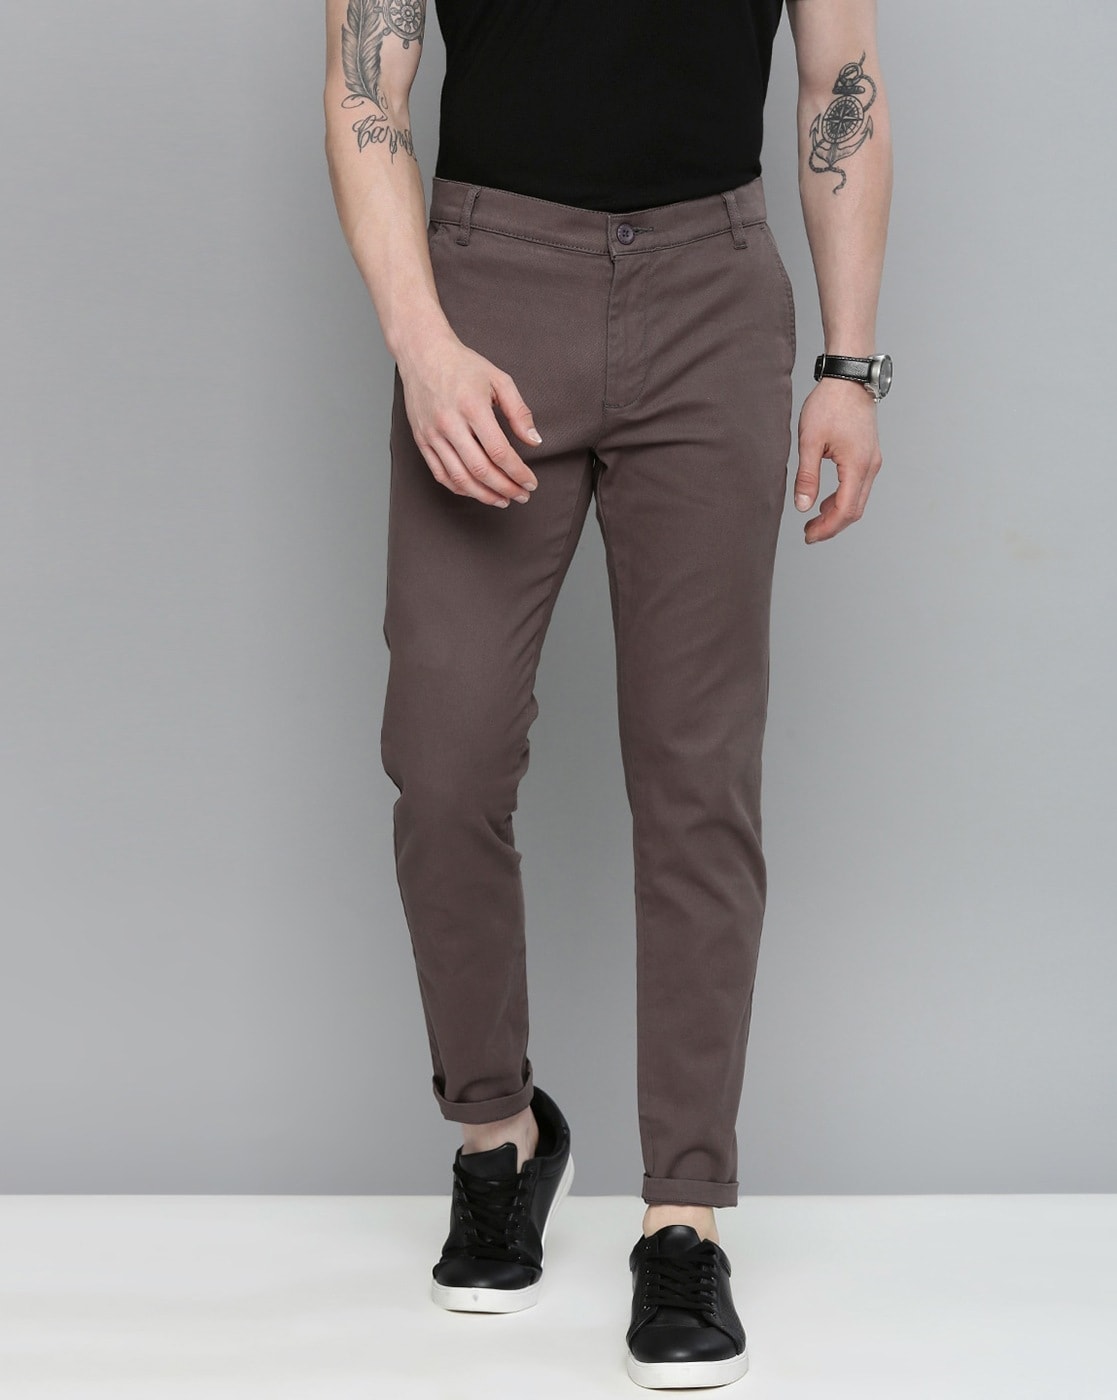 Buy Green Trousers  Pants for Men by The Indian Garage Co Online  Ajiocom